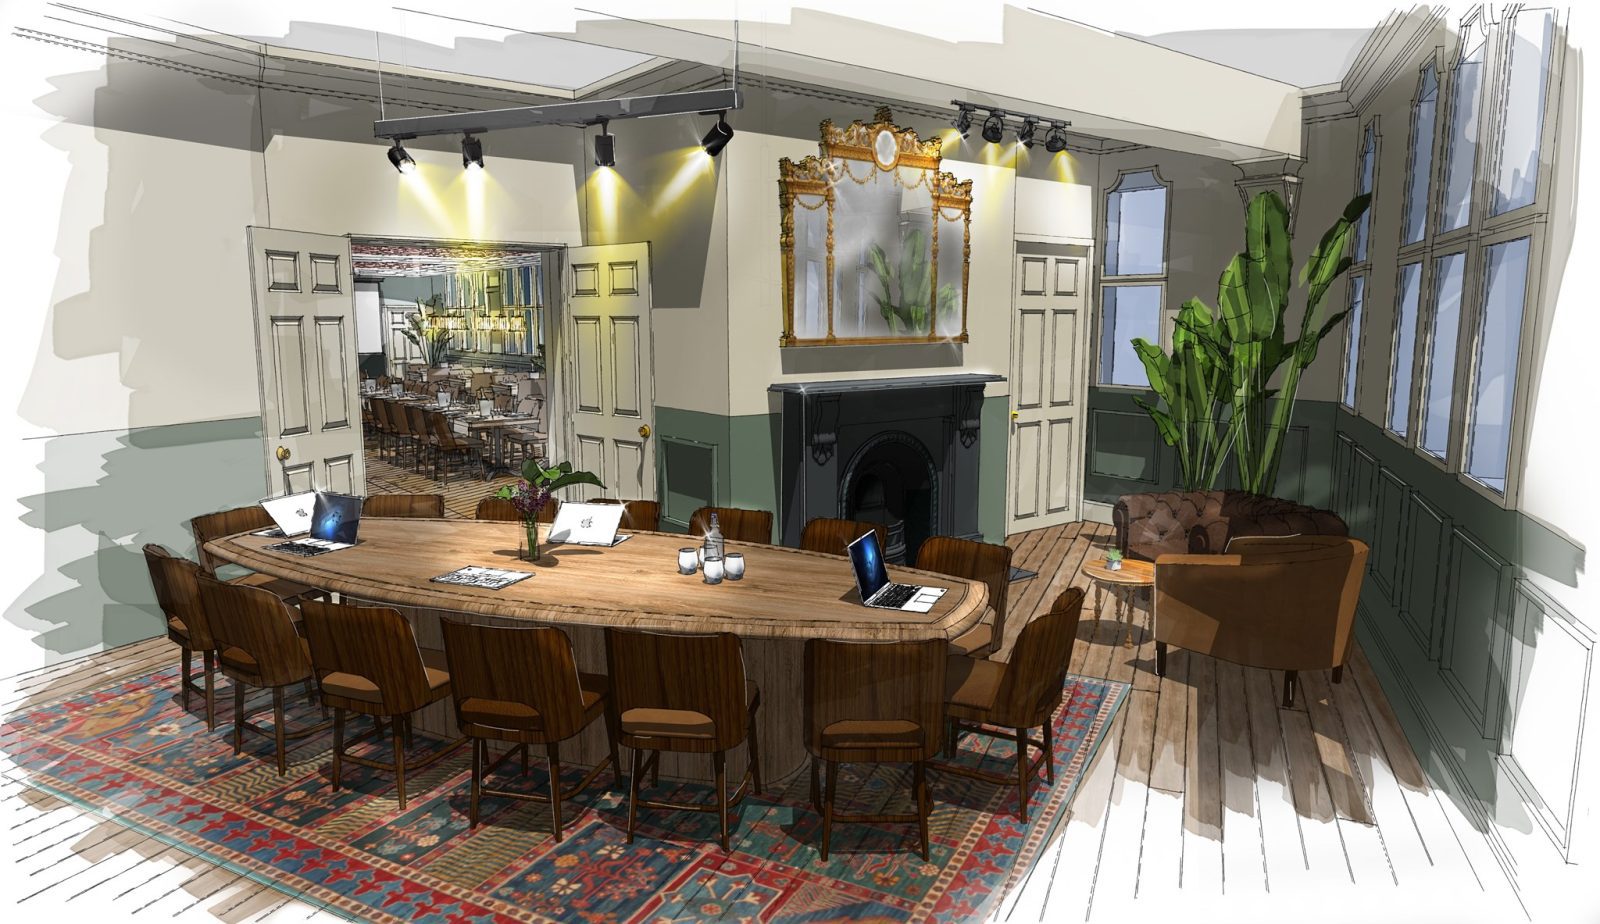 A new gastropub is opening on Albert Square in Manchester, The Manc